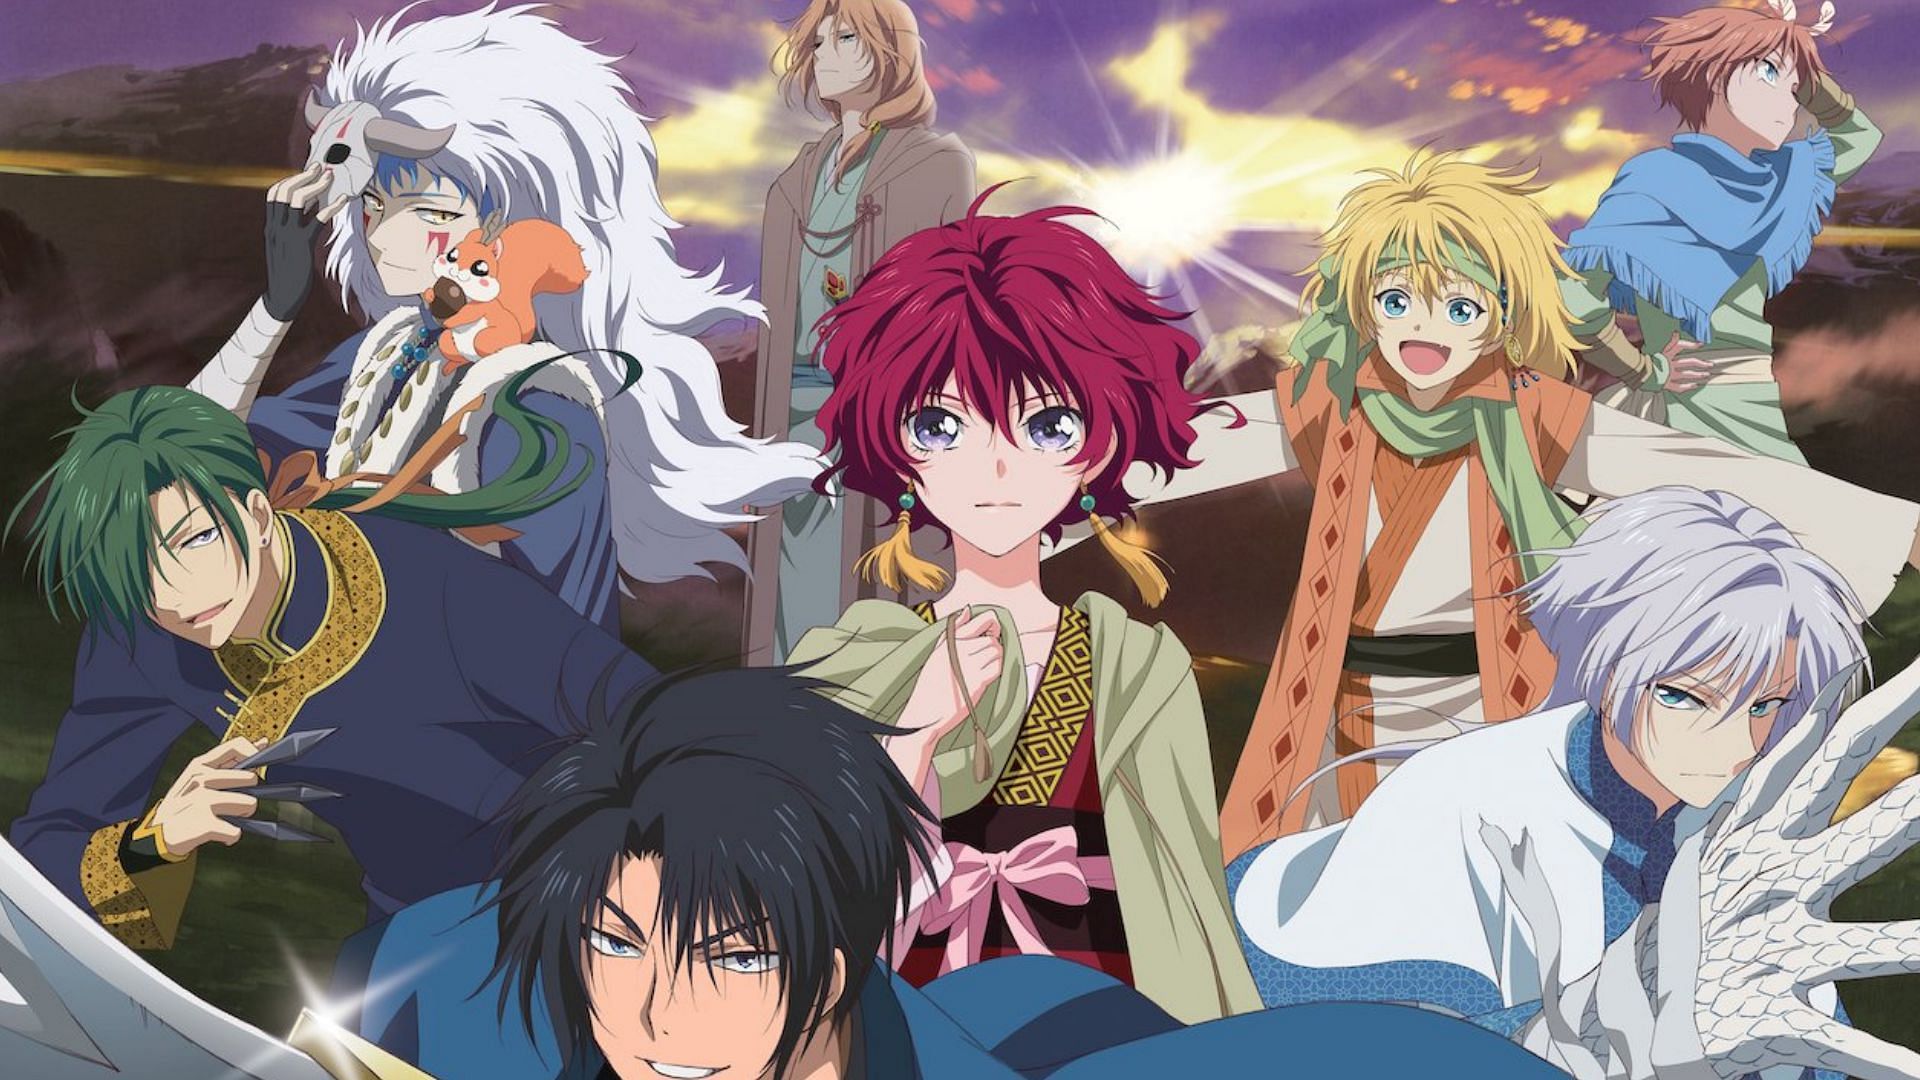 Some of the colorful characters in Yona of the Dawn (Image via Pierrot)